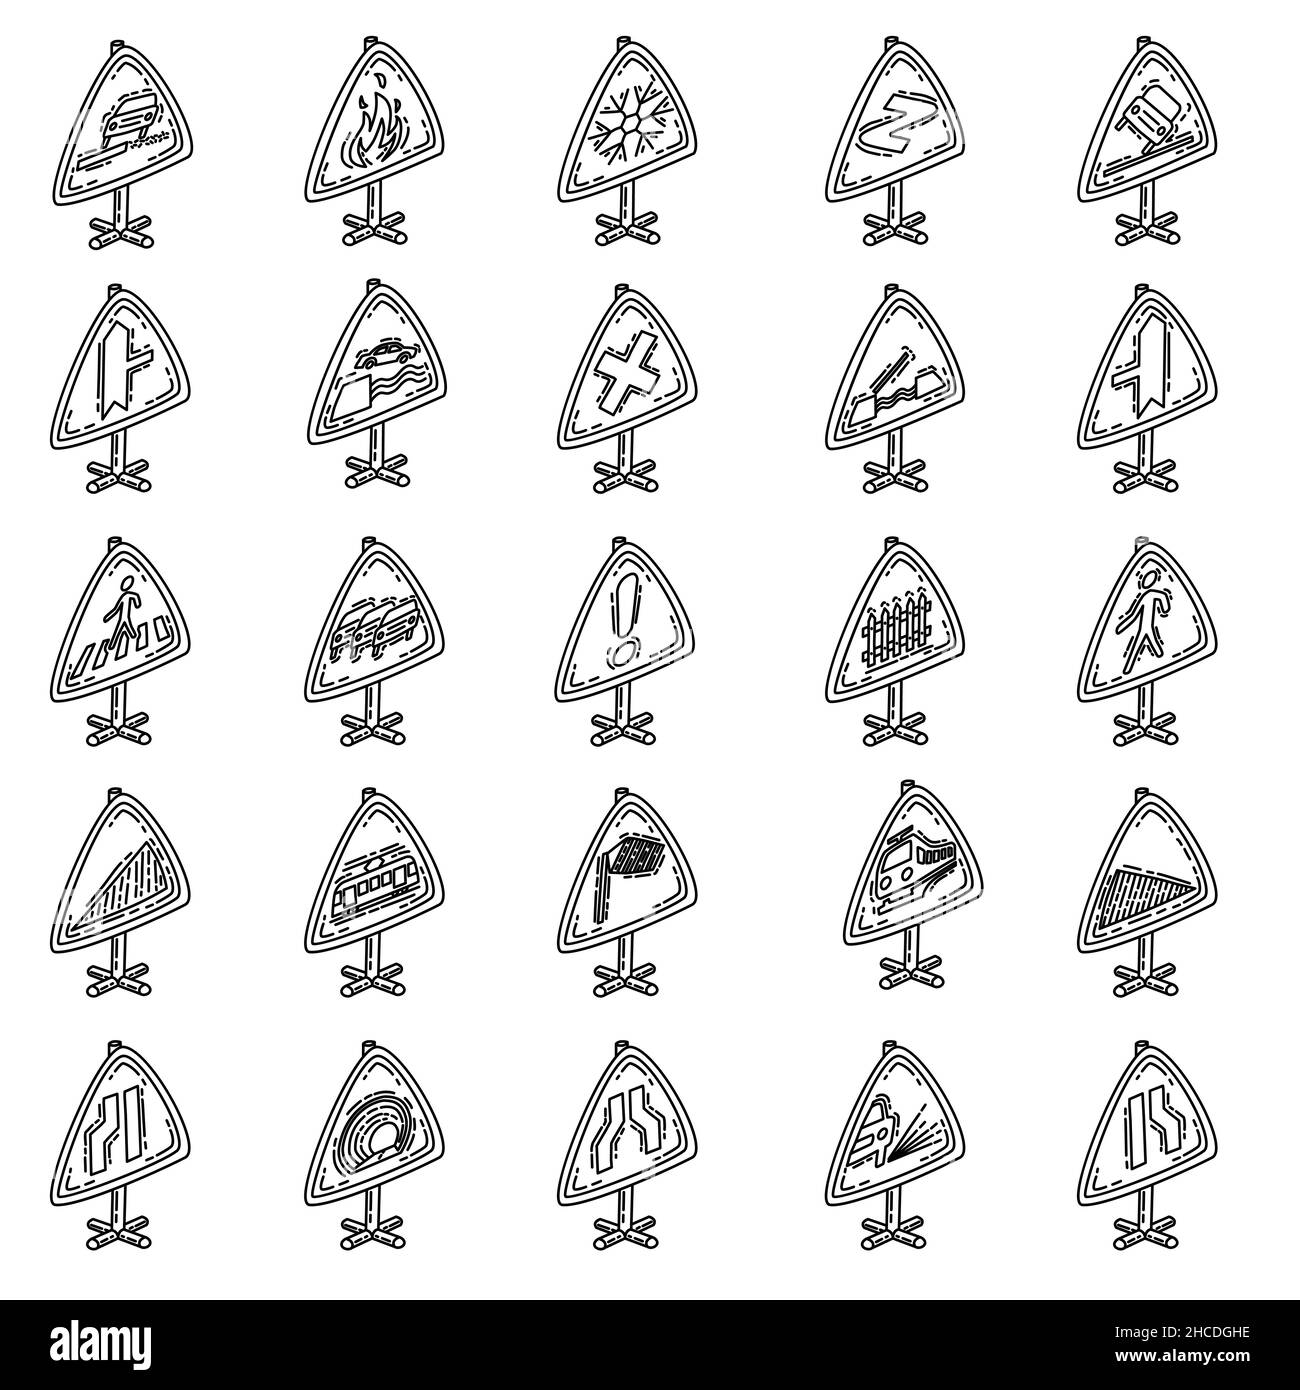 Warning Signs in the Road Hand Drawn Icon Set Vector. Stock Vector